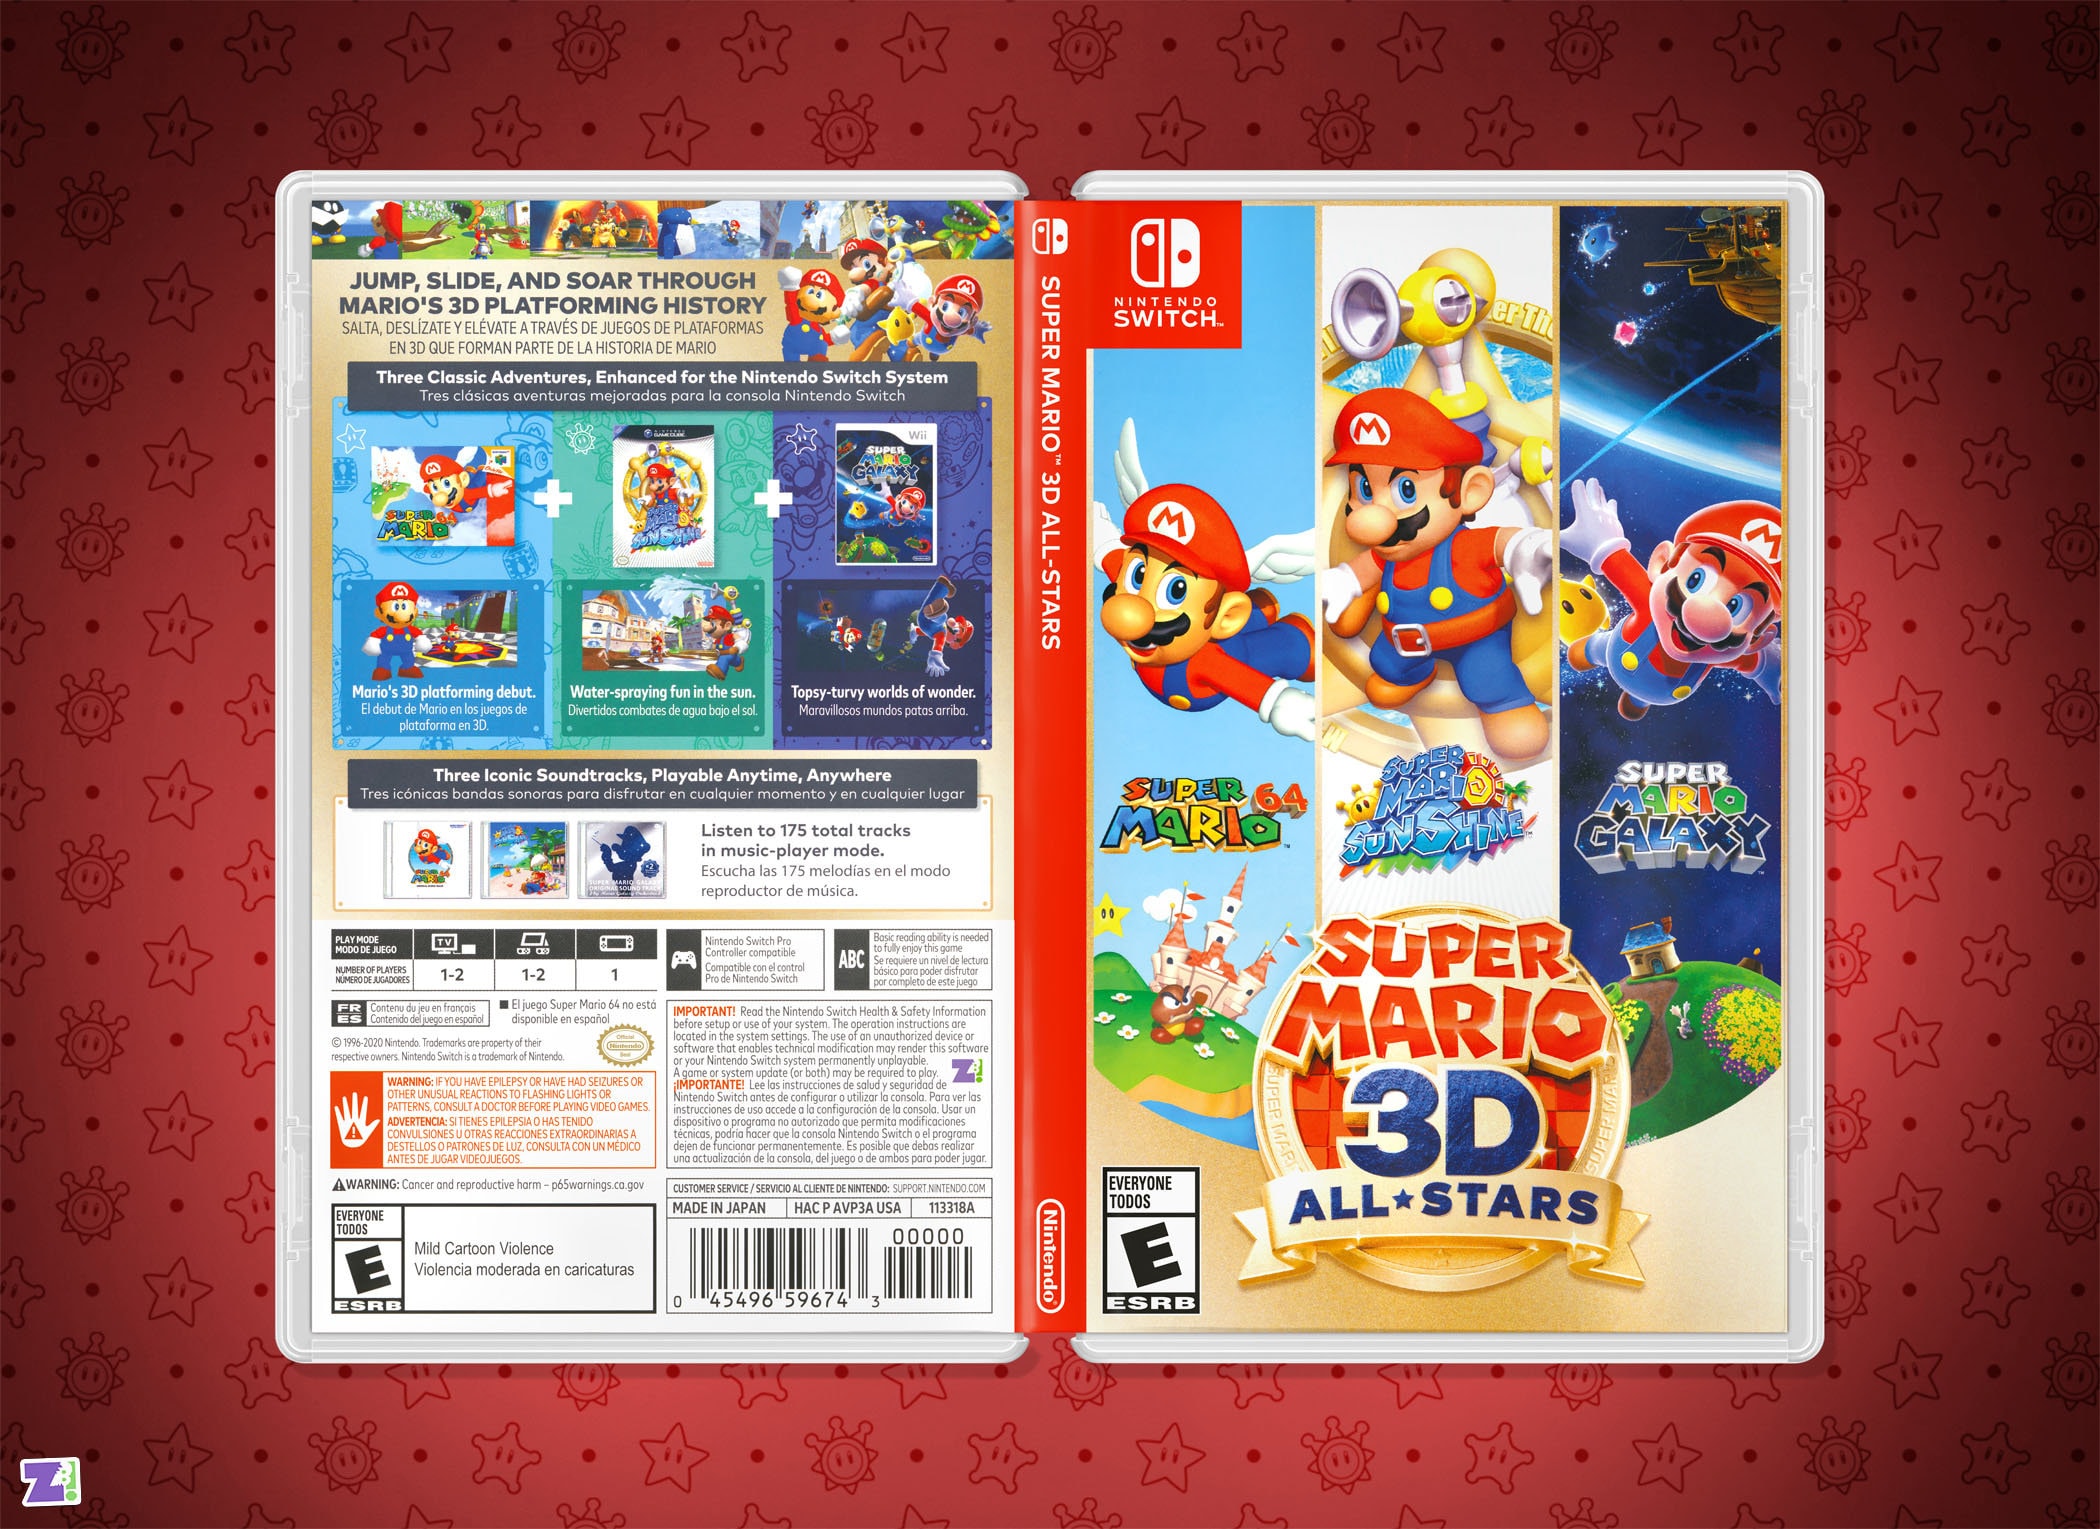 Super Mario Odyssey Cover Art: Replacement Insert & Case for -  Norway